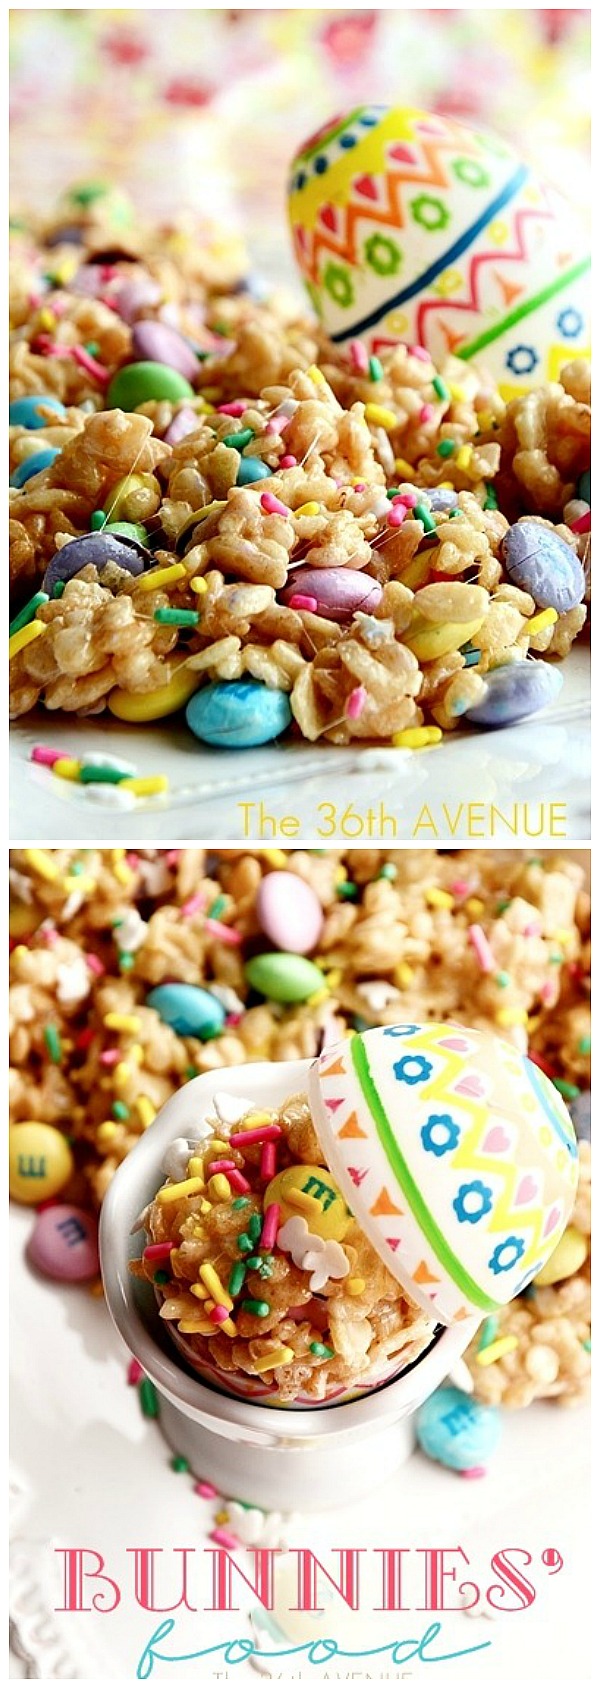 Festive Rice Crispy Treats. This recipe is easy, fun and yummy... Kids love this stuff! #recipes #easter